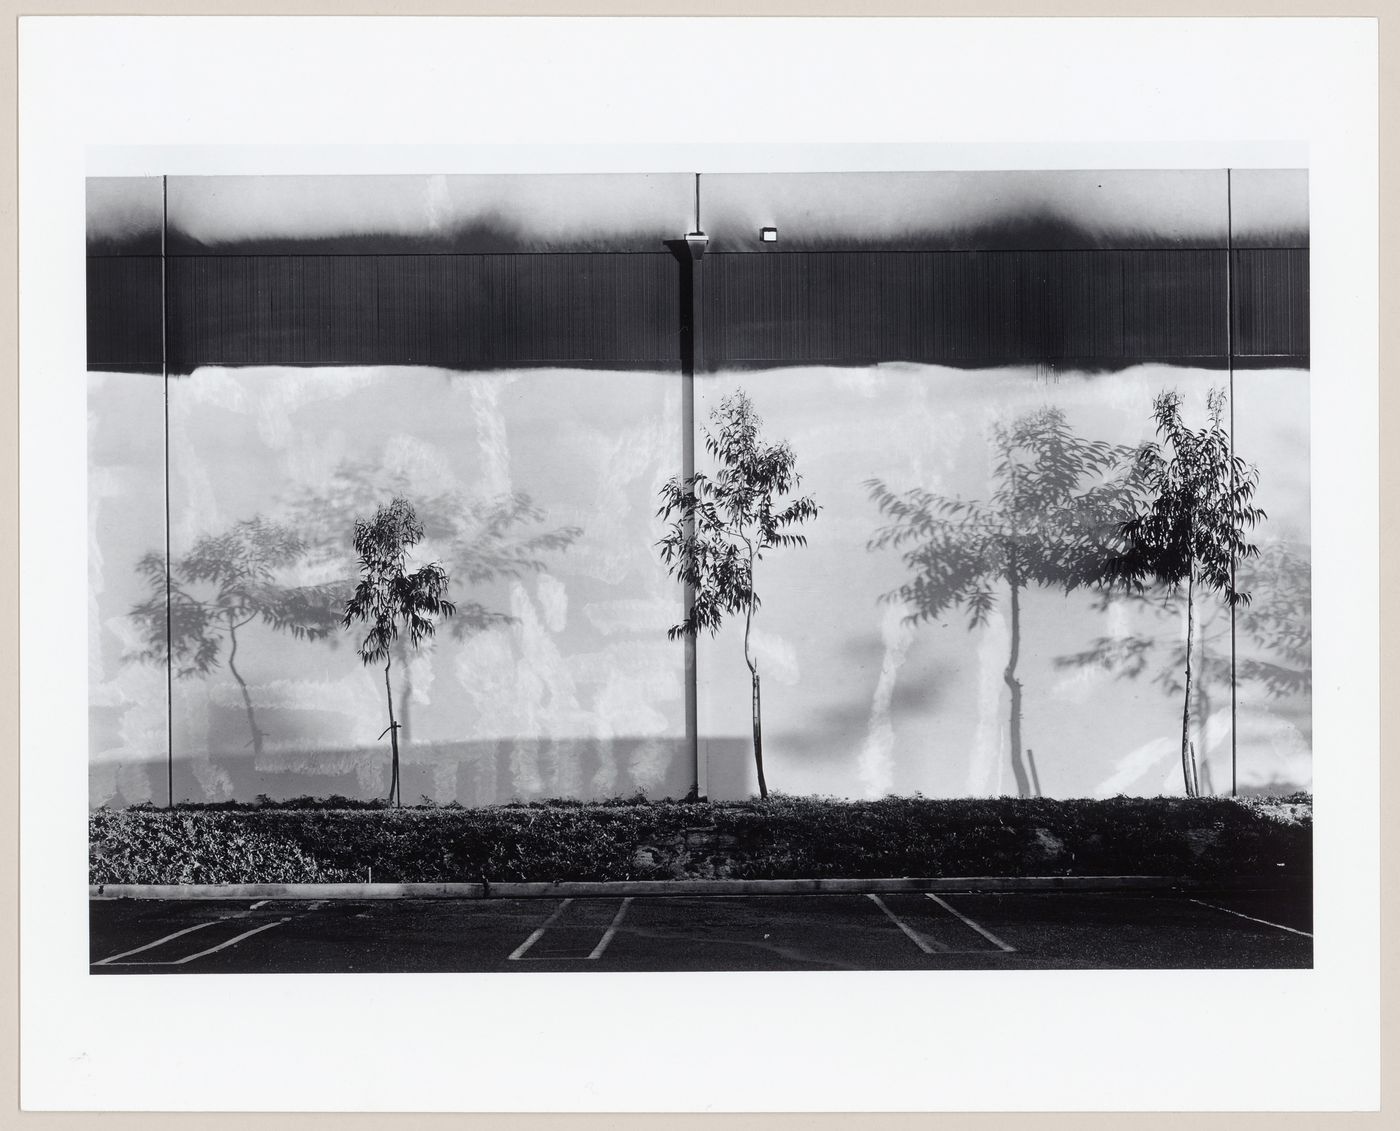 View of the west wall of Semicoa, 333 McCormick, Costa Mesa, California, United States, from the series “The new Industrial Parks near Irvine, California”